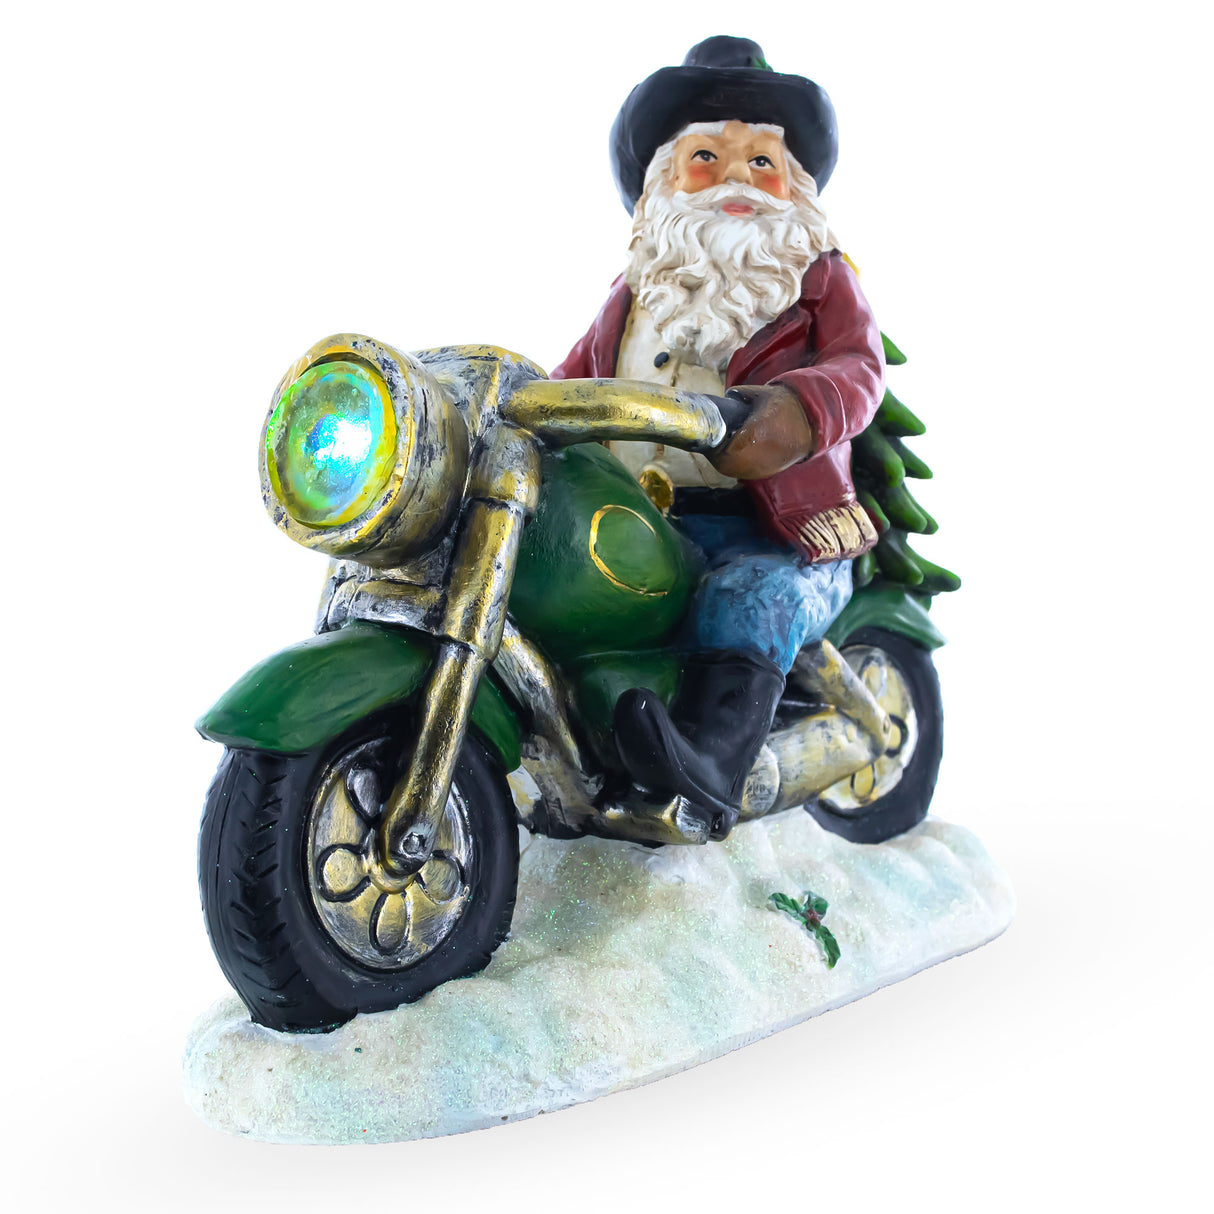 Shop Santa the Cowboy Riding Motorcycle LED Light Figurine 8.5 Inches. Resin Christmas Decor Figurines Santa AL for Sale by Online Gift Shop BestPysanky